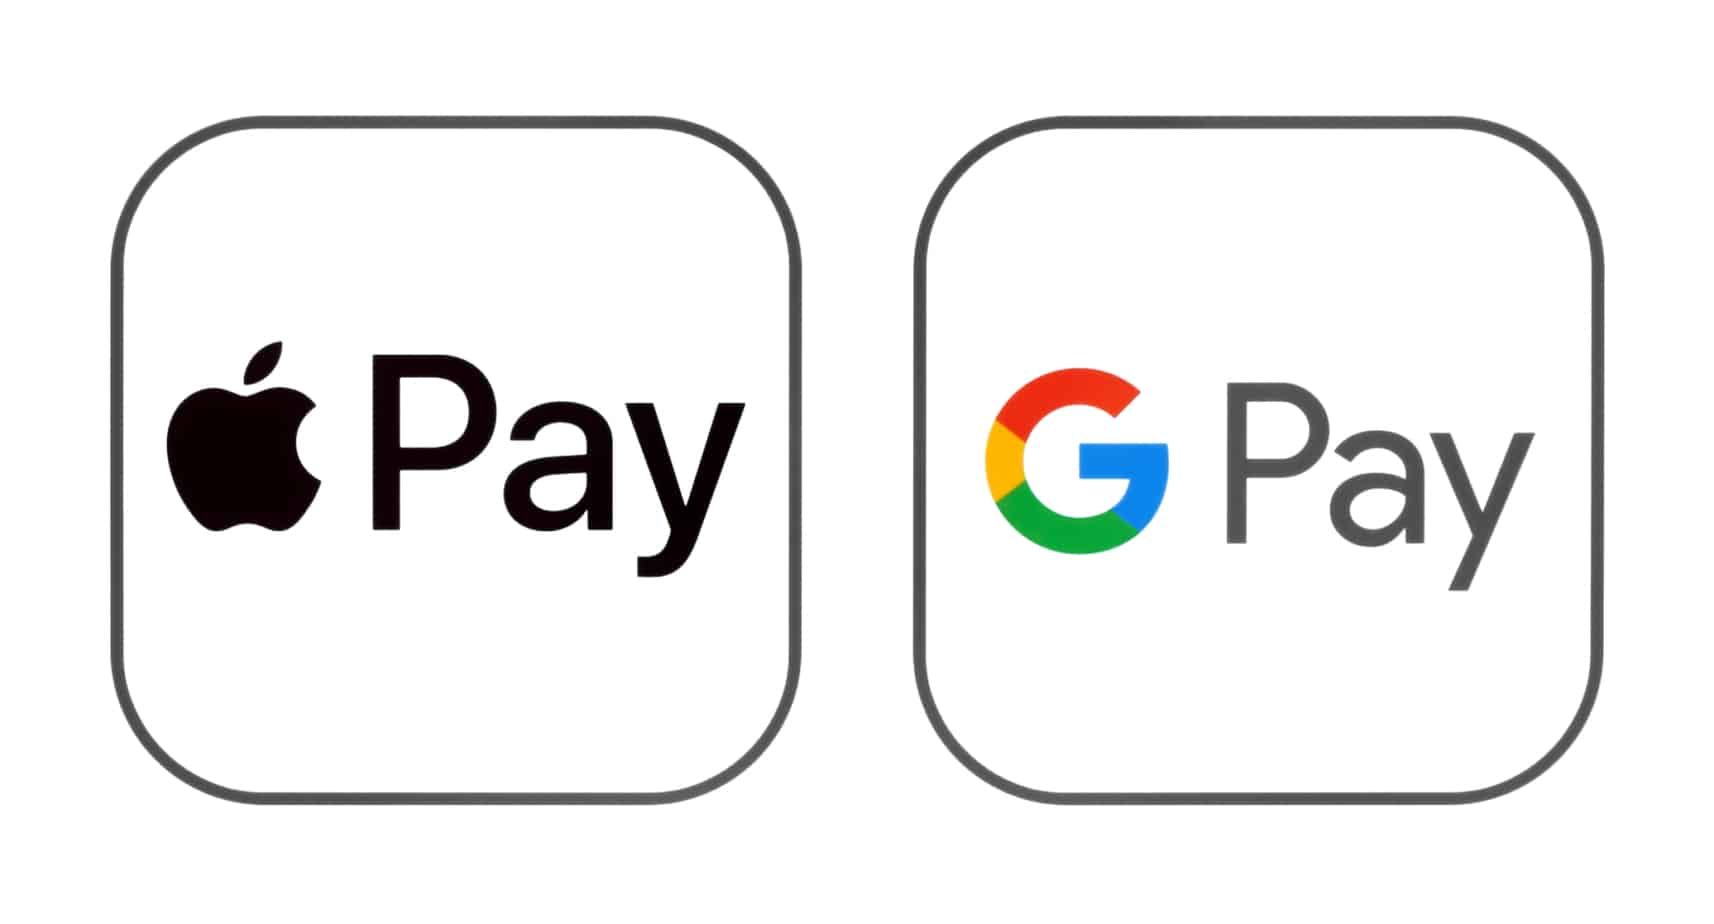 The apple pay and google pay logos are on a white background.